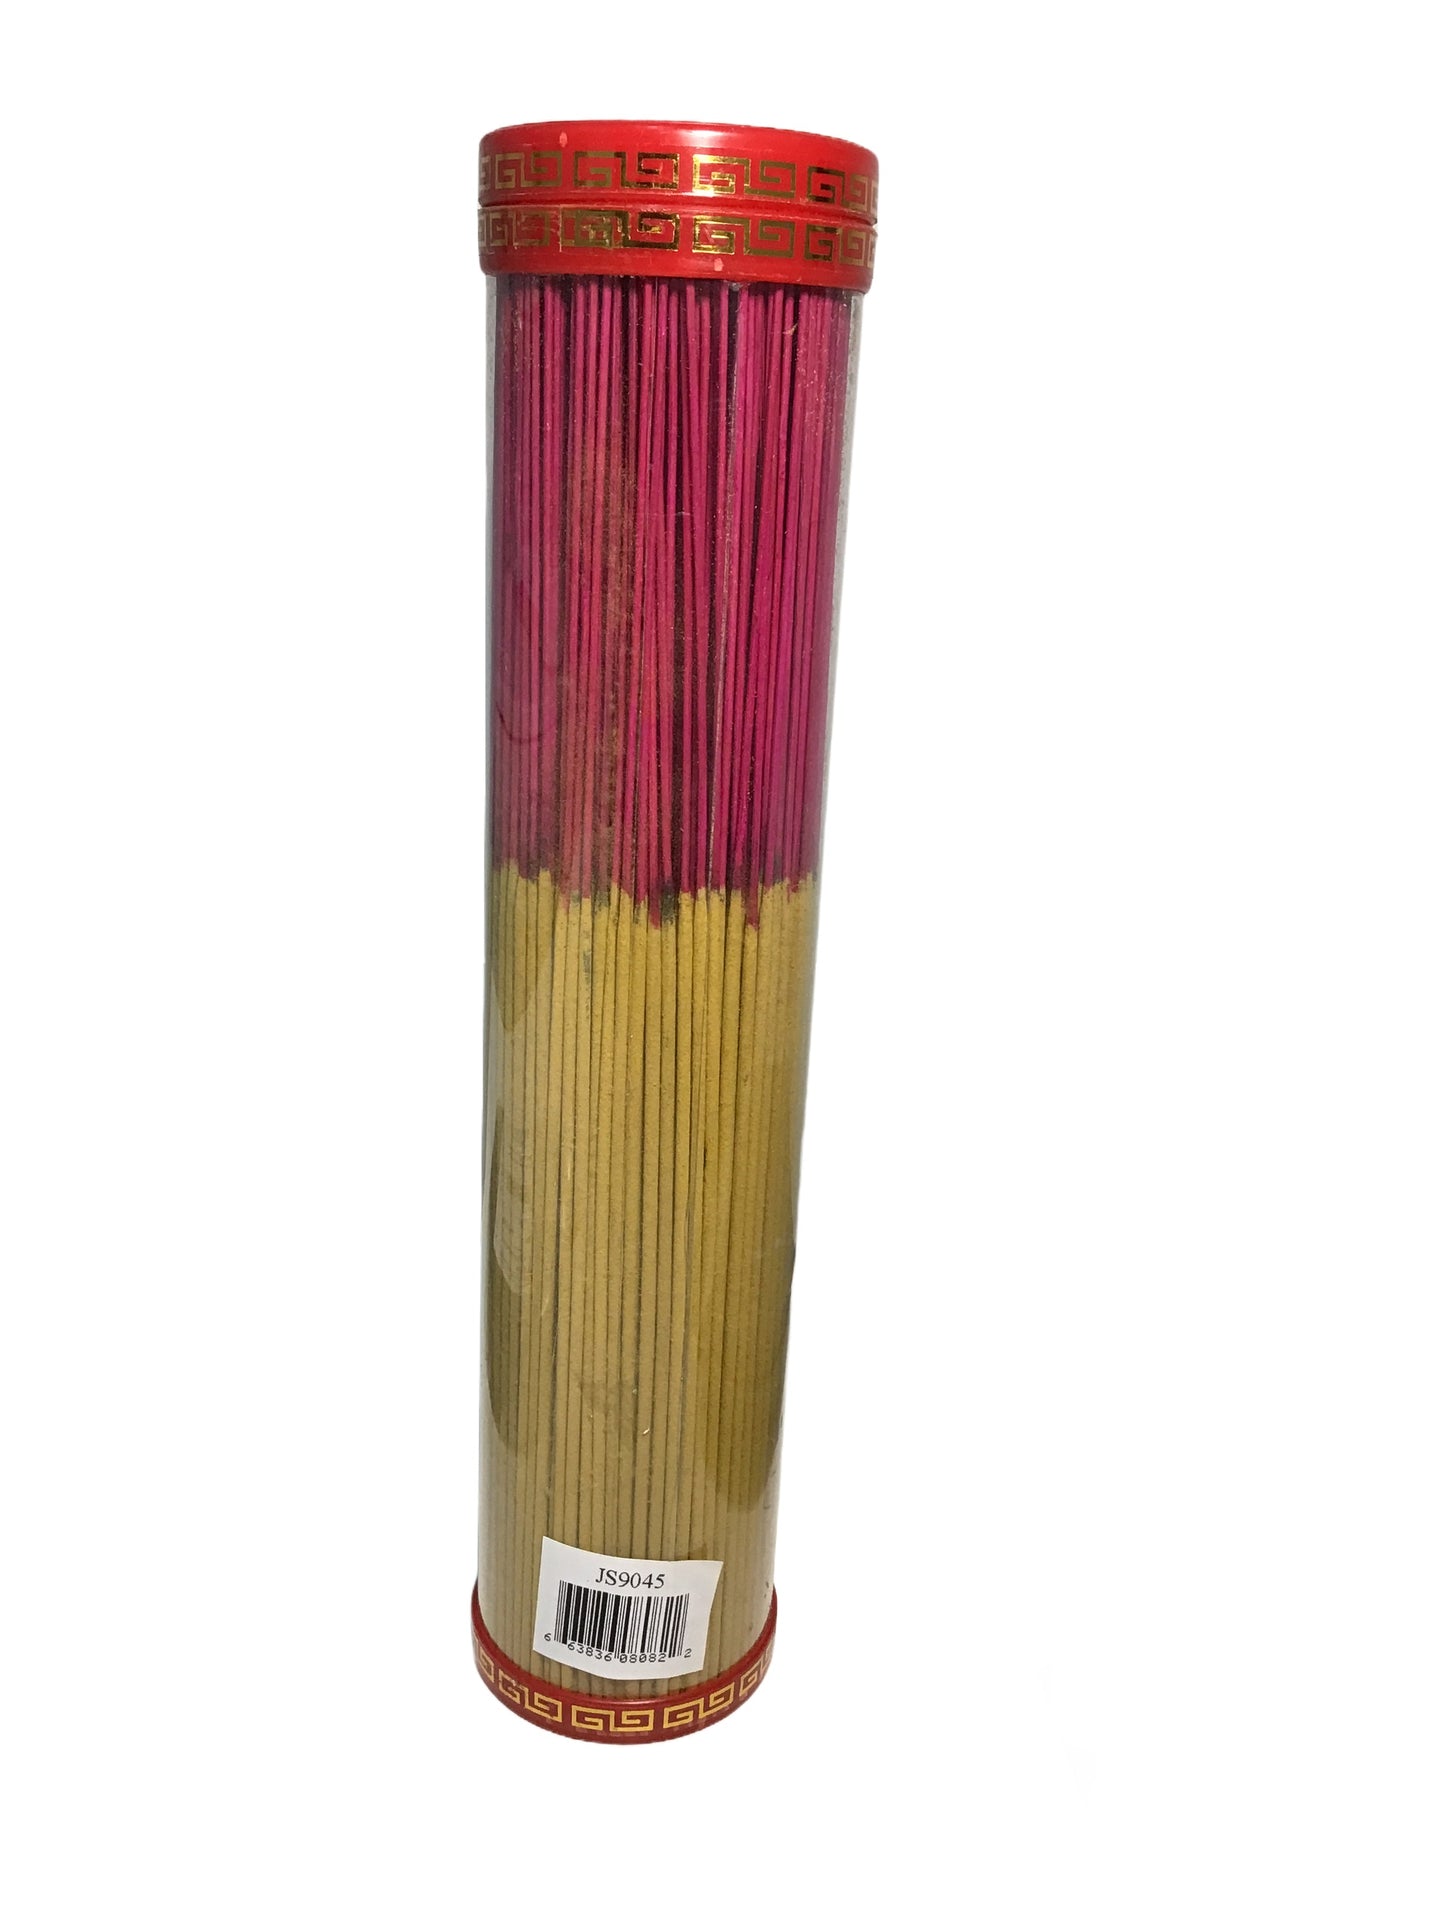 25cm Long Incense Sticks for Wishes Fortune and Prosperity - About 400 Sticks 双鲤牌 发财鸿运香皇 微烟